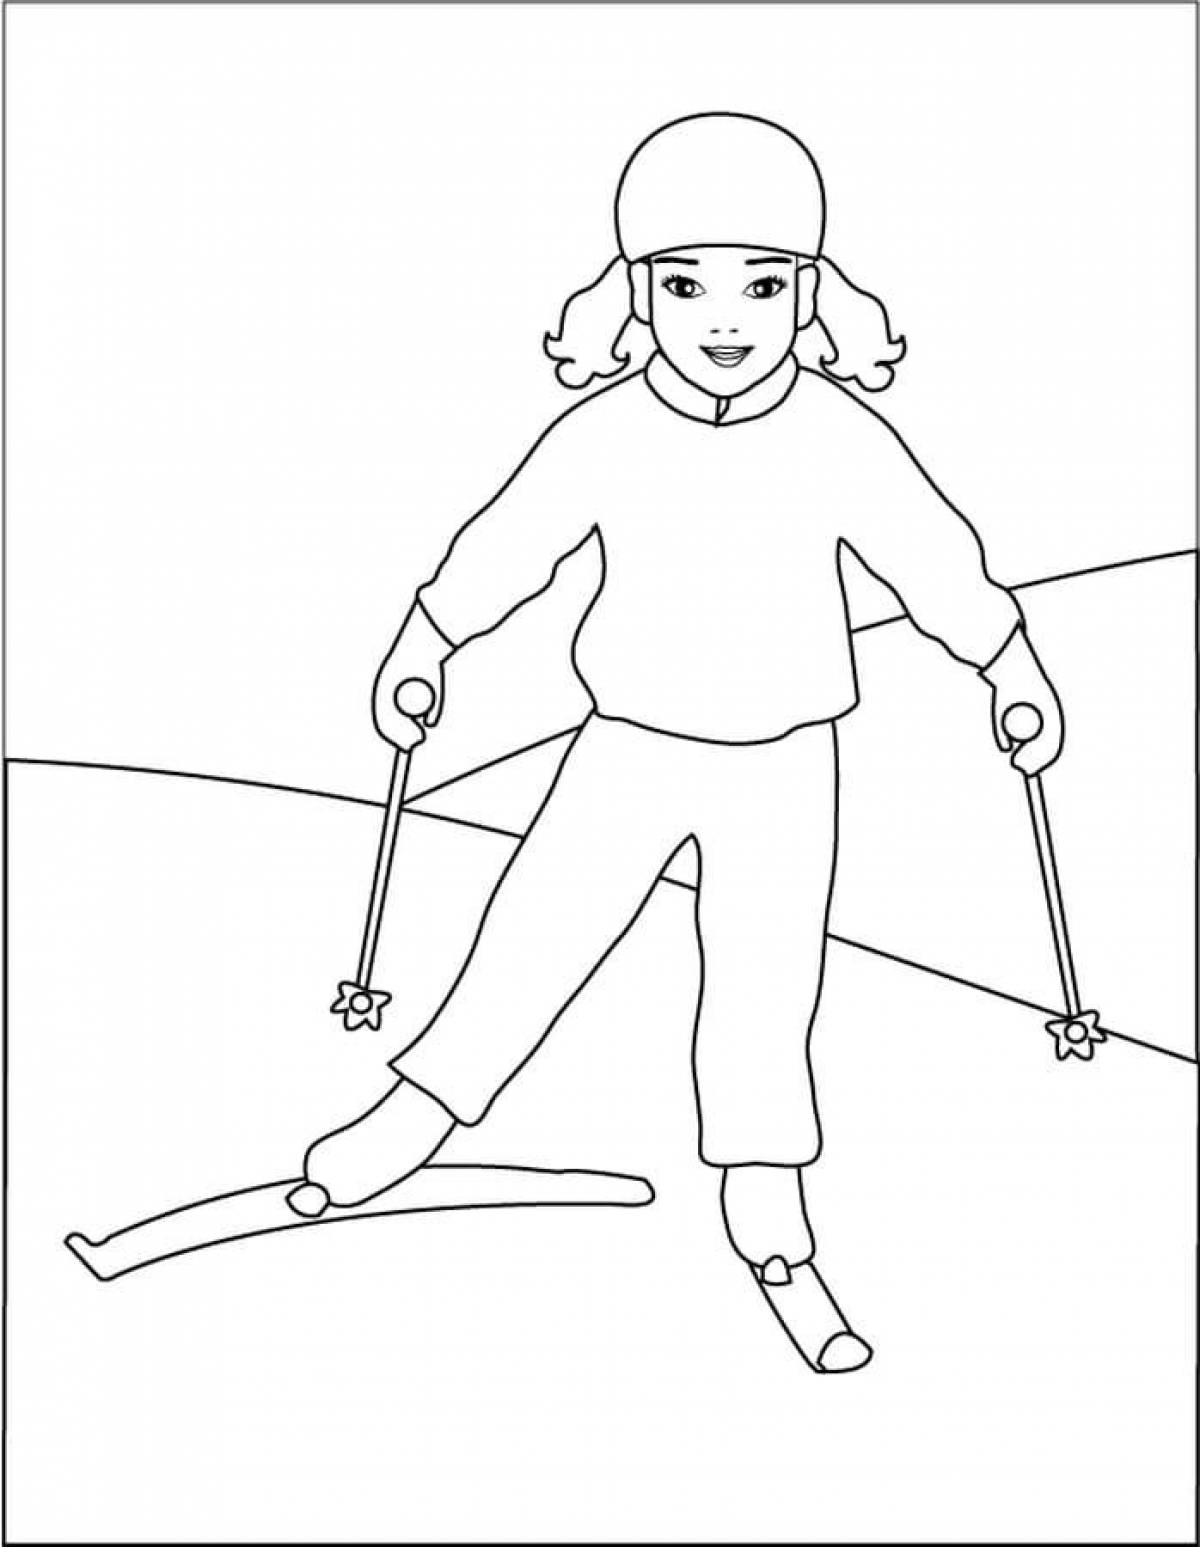 Courageous skier coloring page